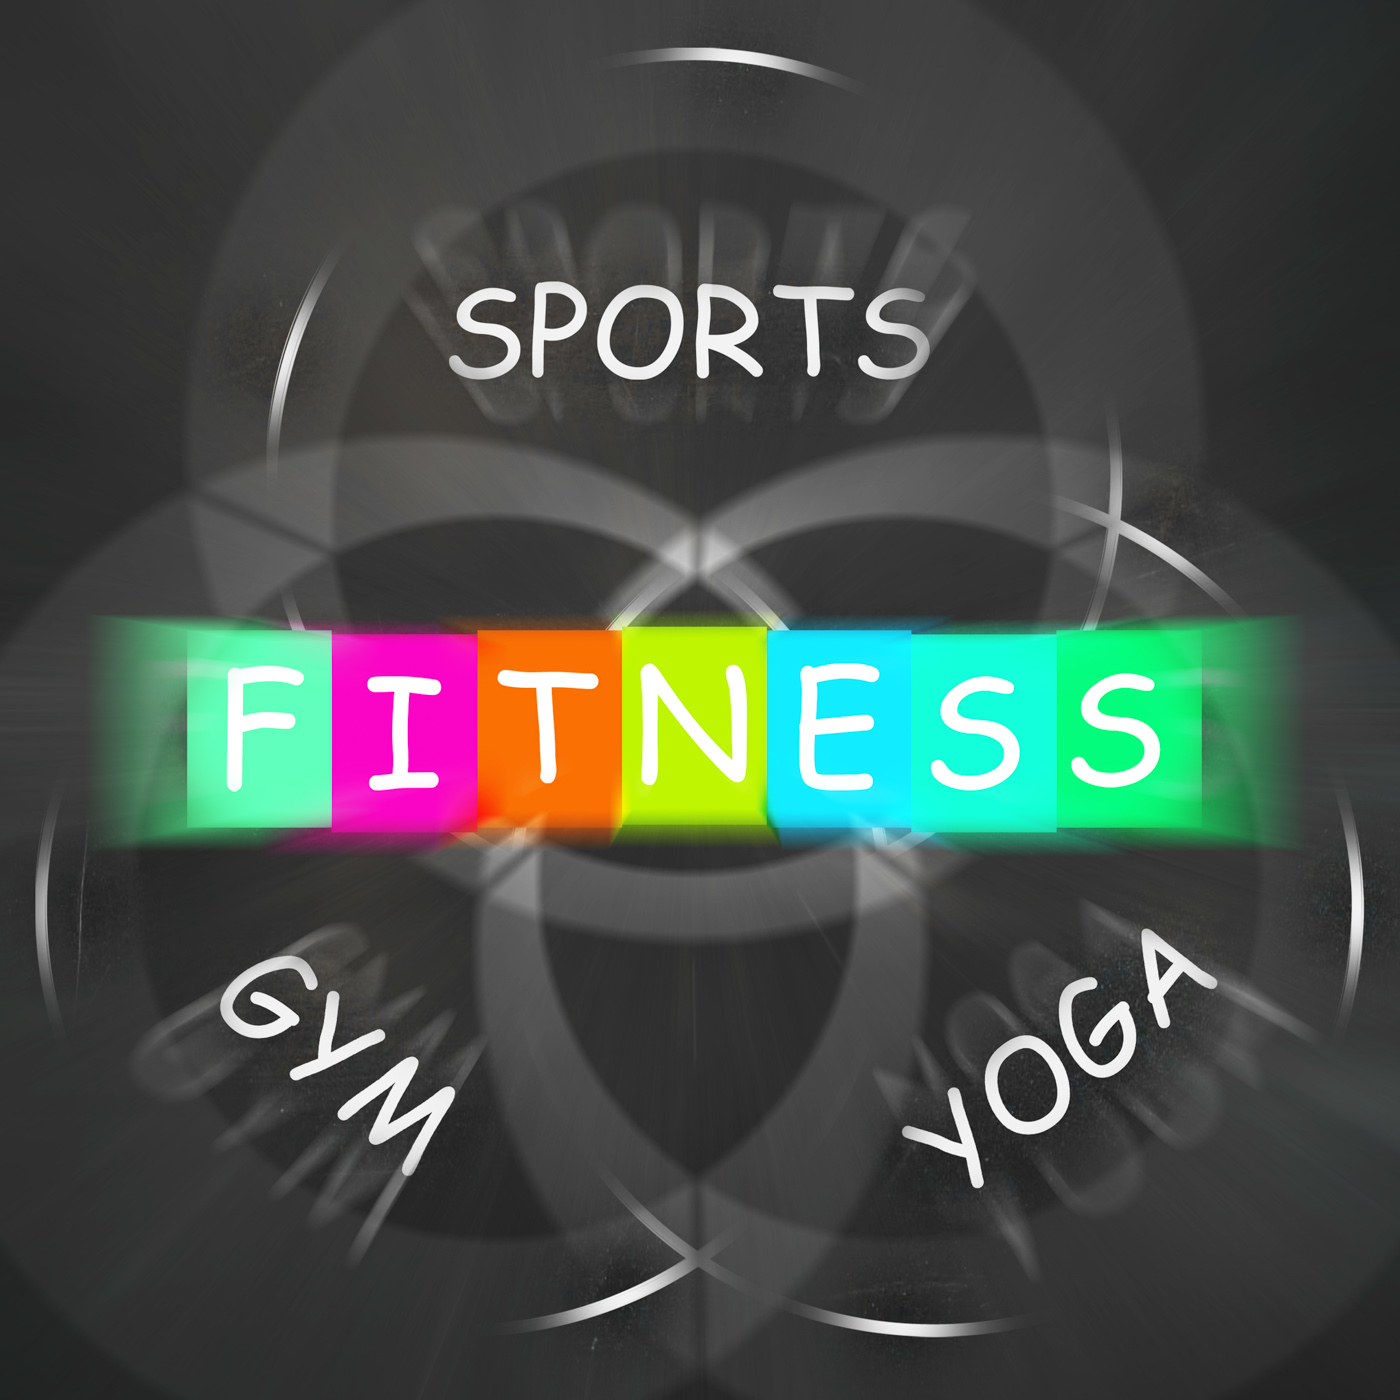 Fitness activities displays sports yoga and gym exercise photo